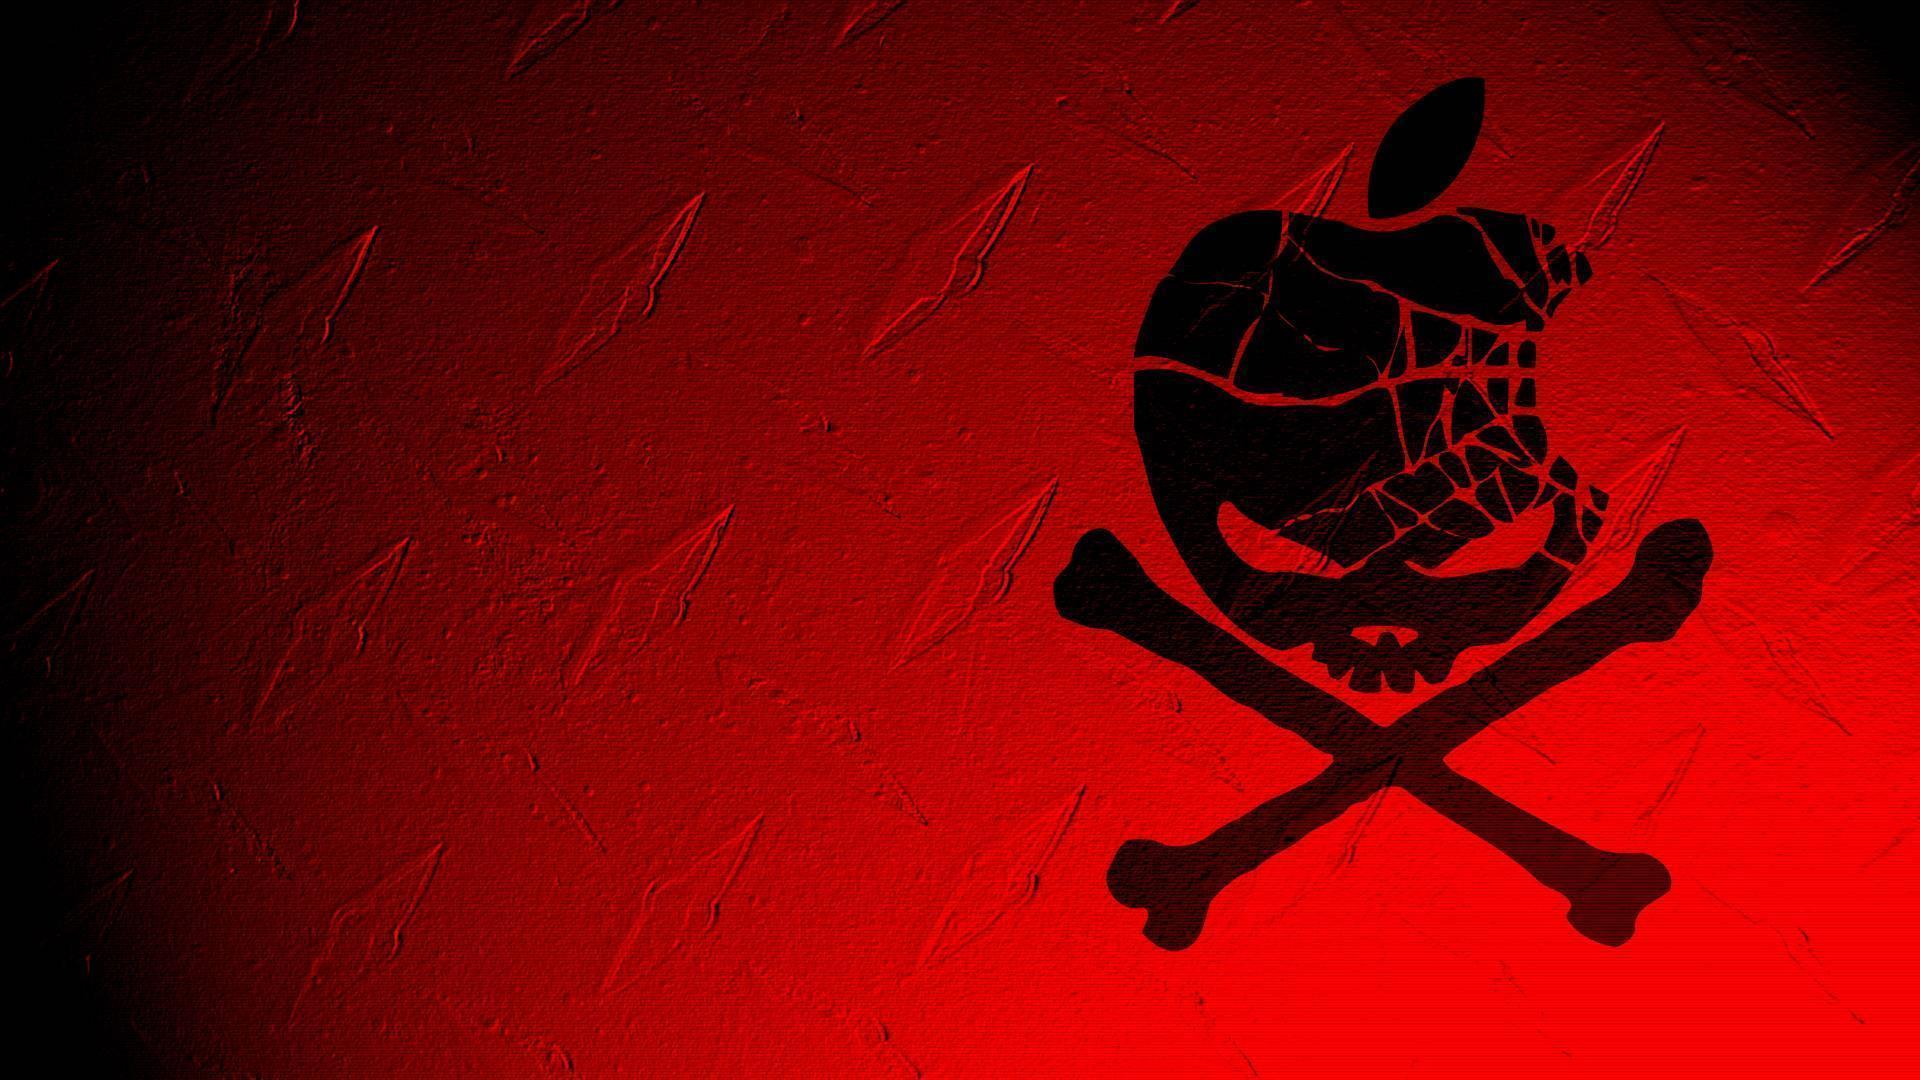 Wallpaper For > Black And Red Apple Wallpaper